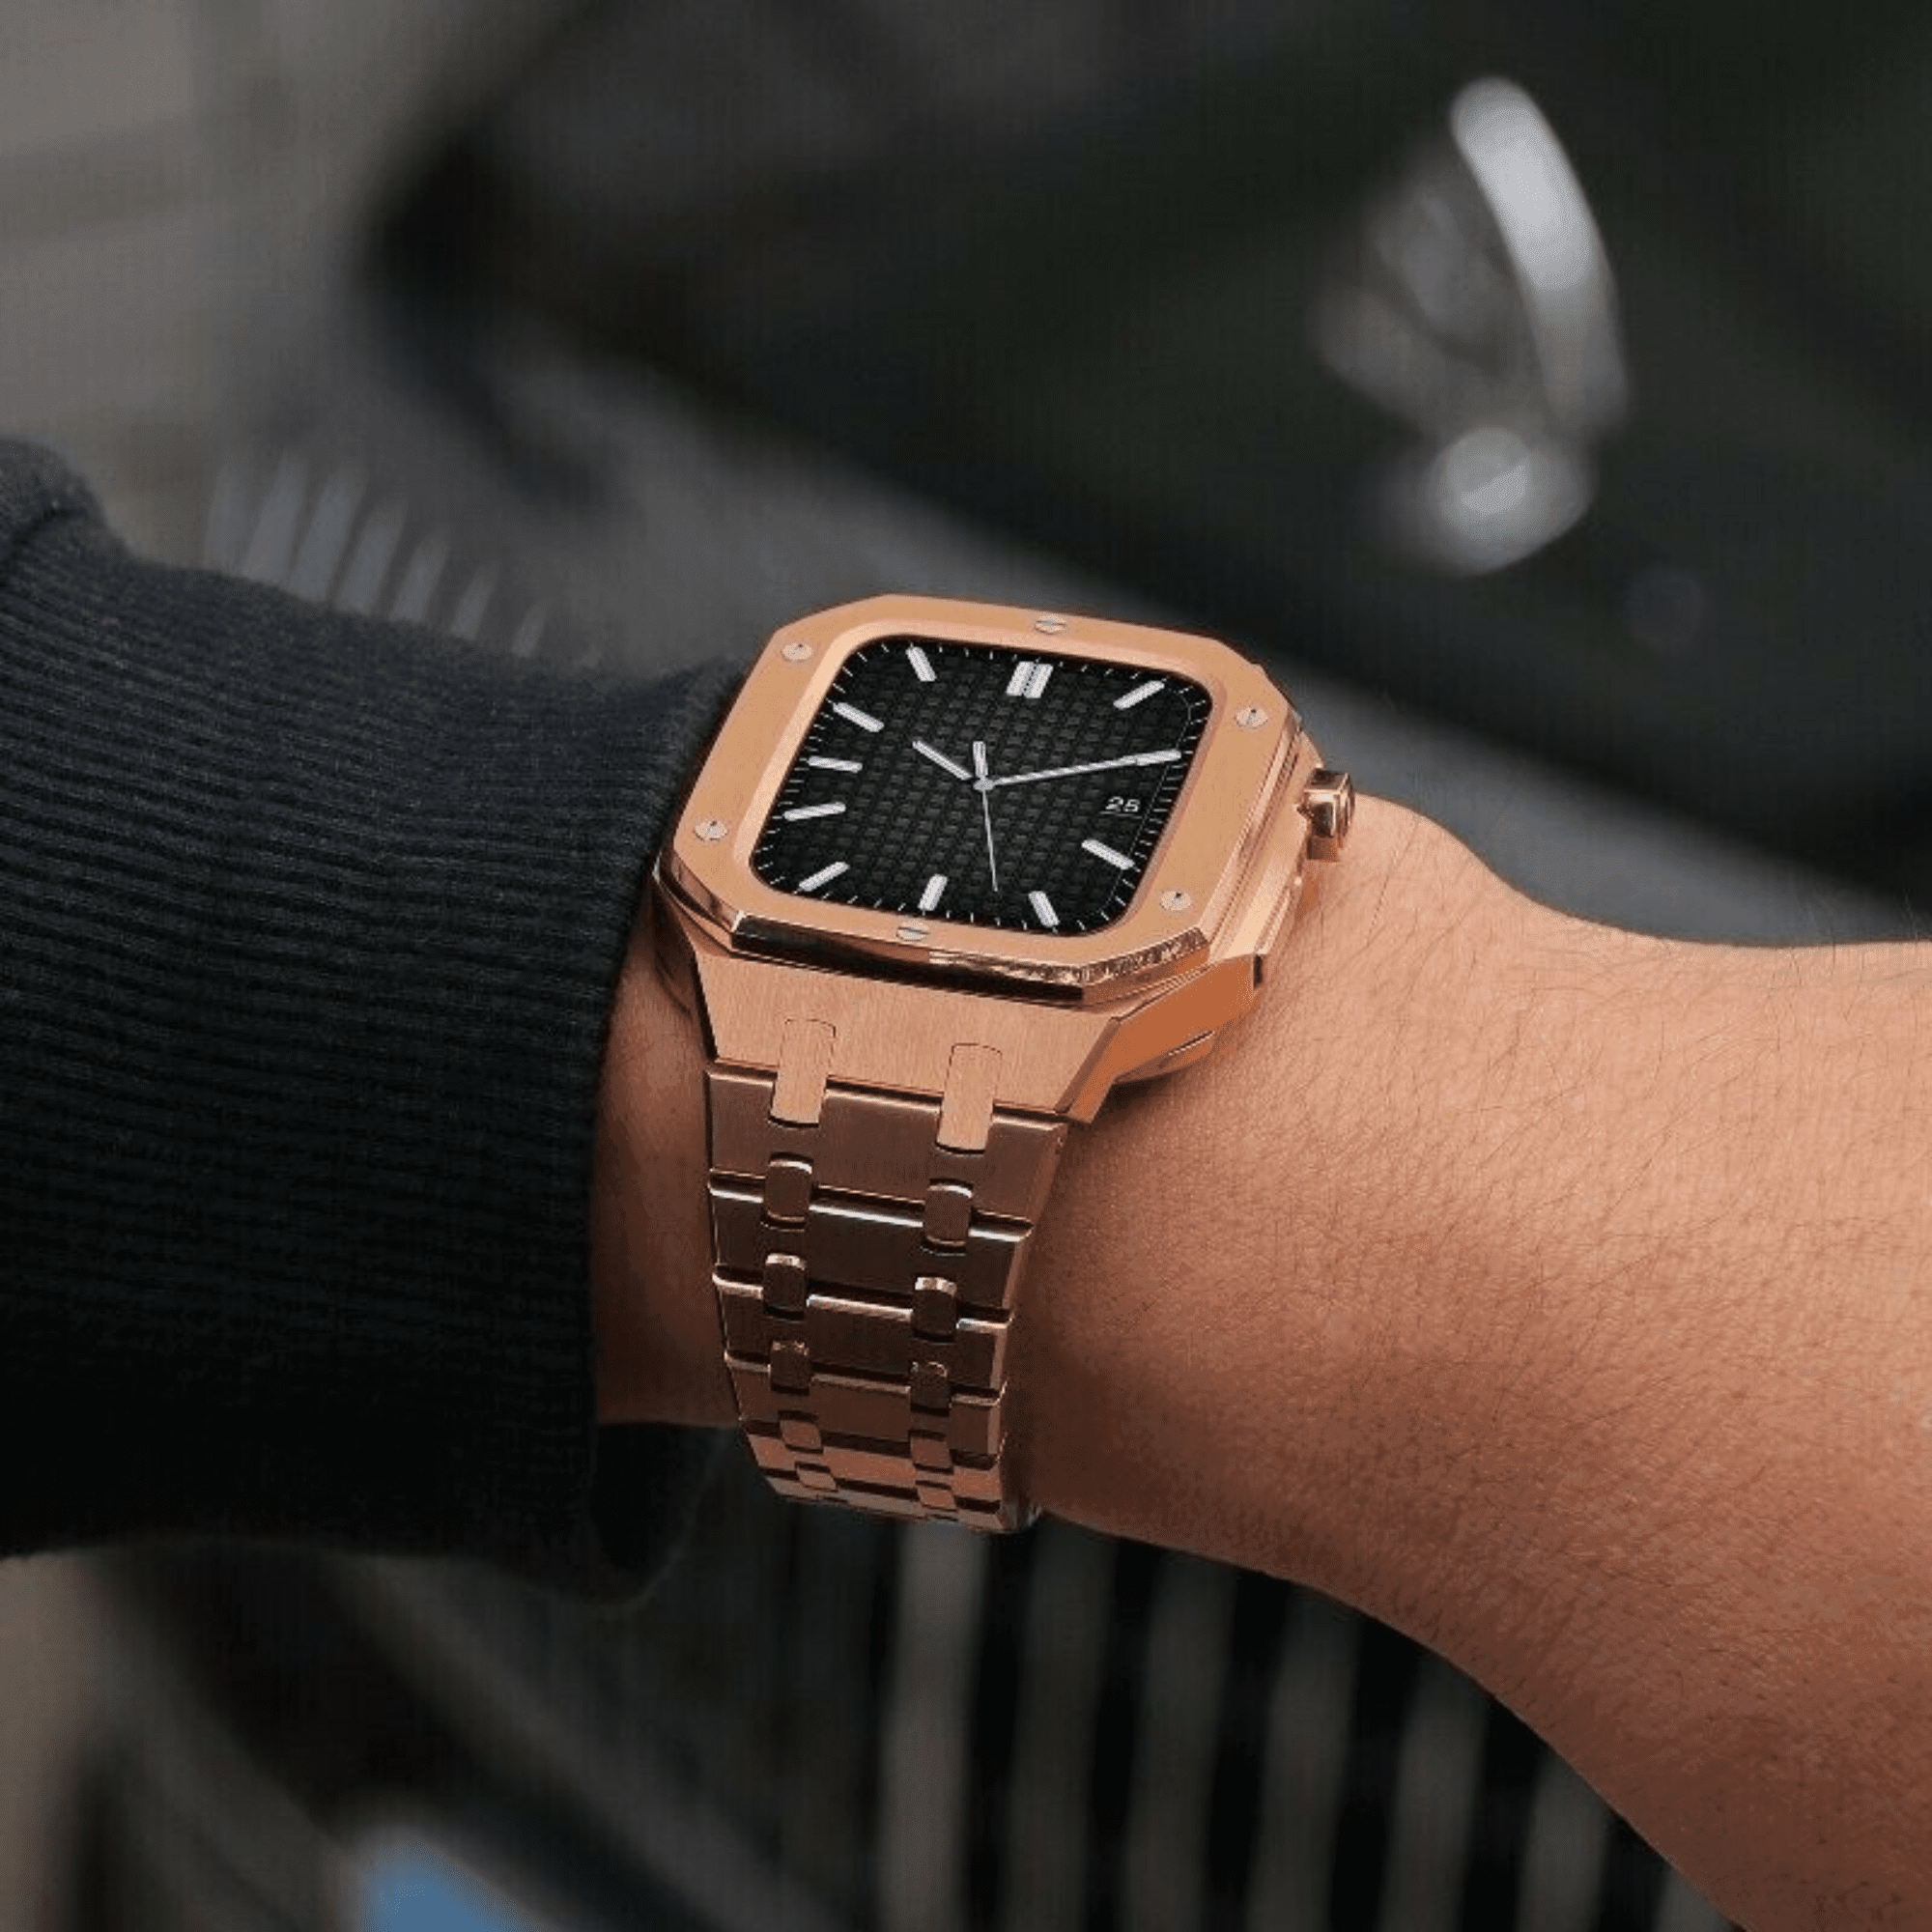 Luxury Metal Mod Kit for Apple Watch | Leather & Stainless Steel Straps | Apple Watch SE/3/4/5/6/7/8 accessory 44 mm| Rosè Gold Case - Rosè Gold Band mod kits india dream watches apple watch